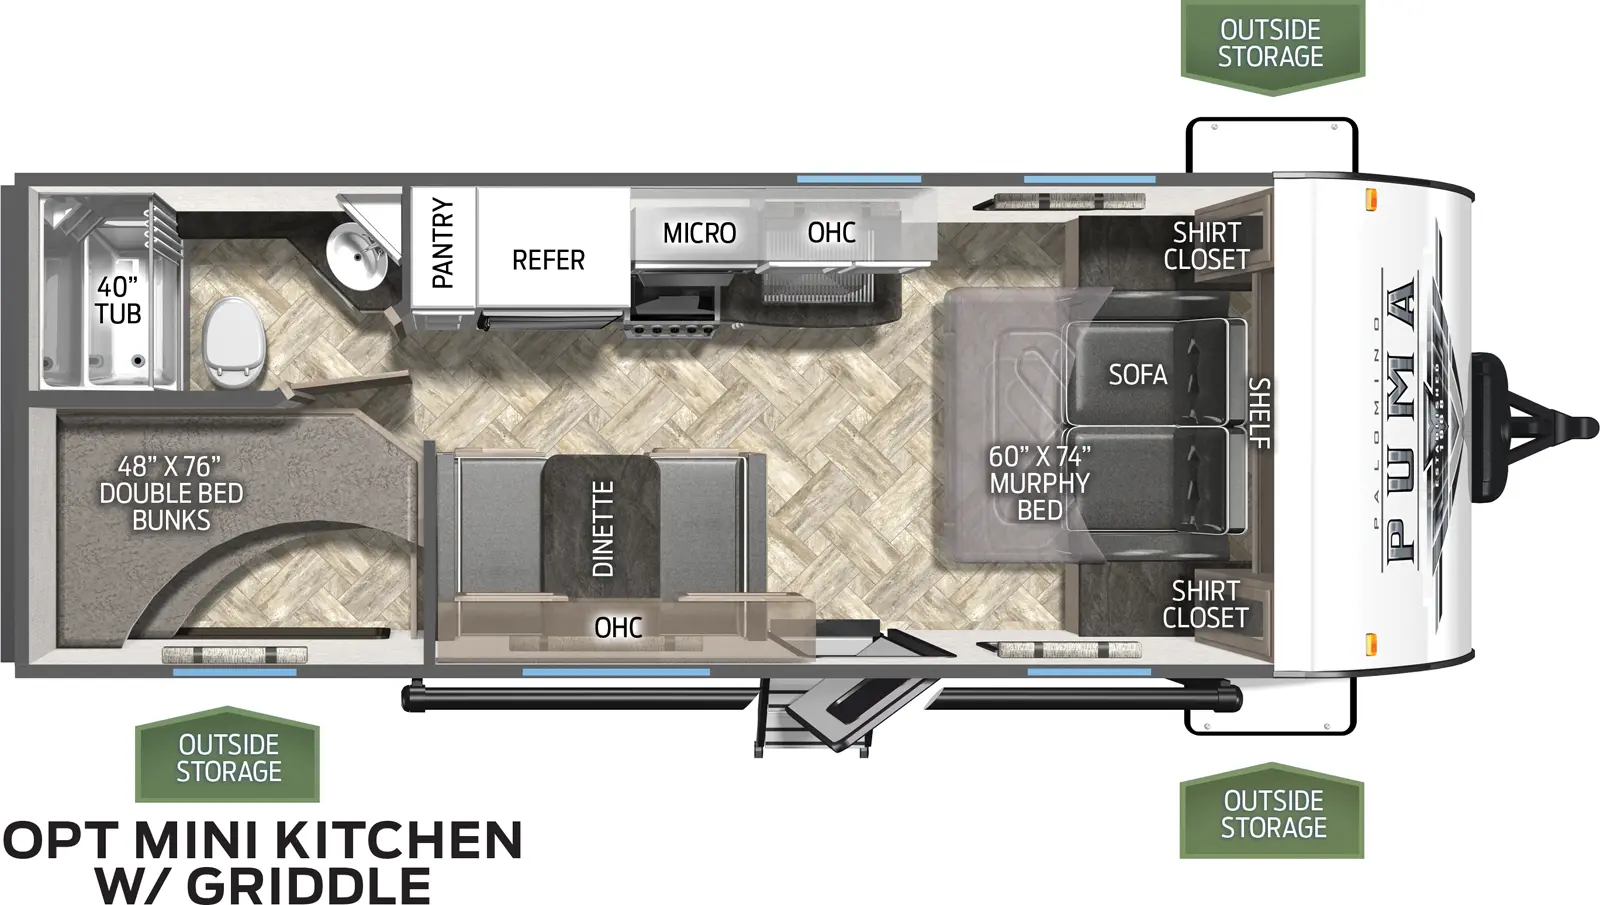 The 20MBC has no slide outs. Exterior features include a 14 foot awning and a mini camp kitchen with griddle. Interior layout from the front to back: sofa/murphy bed, two end tables; booth dinette; kitchen with microwave, cooktop stove, refrigerator and pantry; full bathroom; double stacked bunk beds.